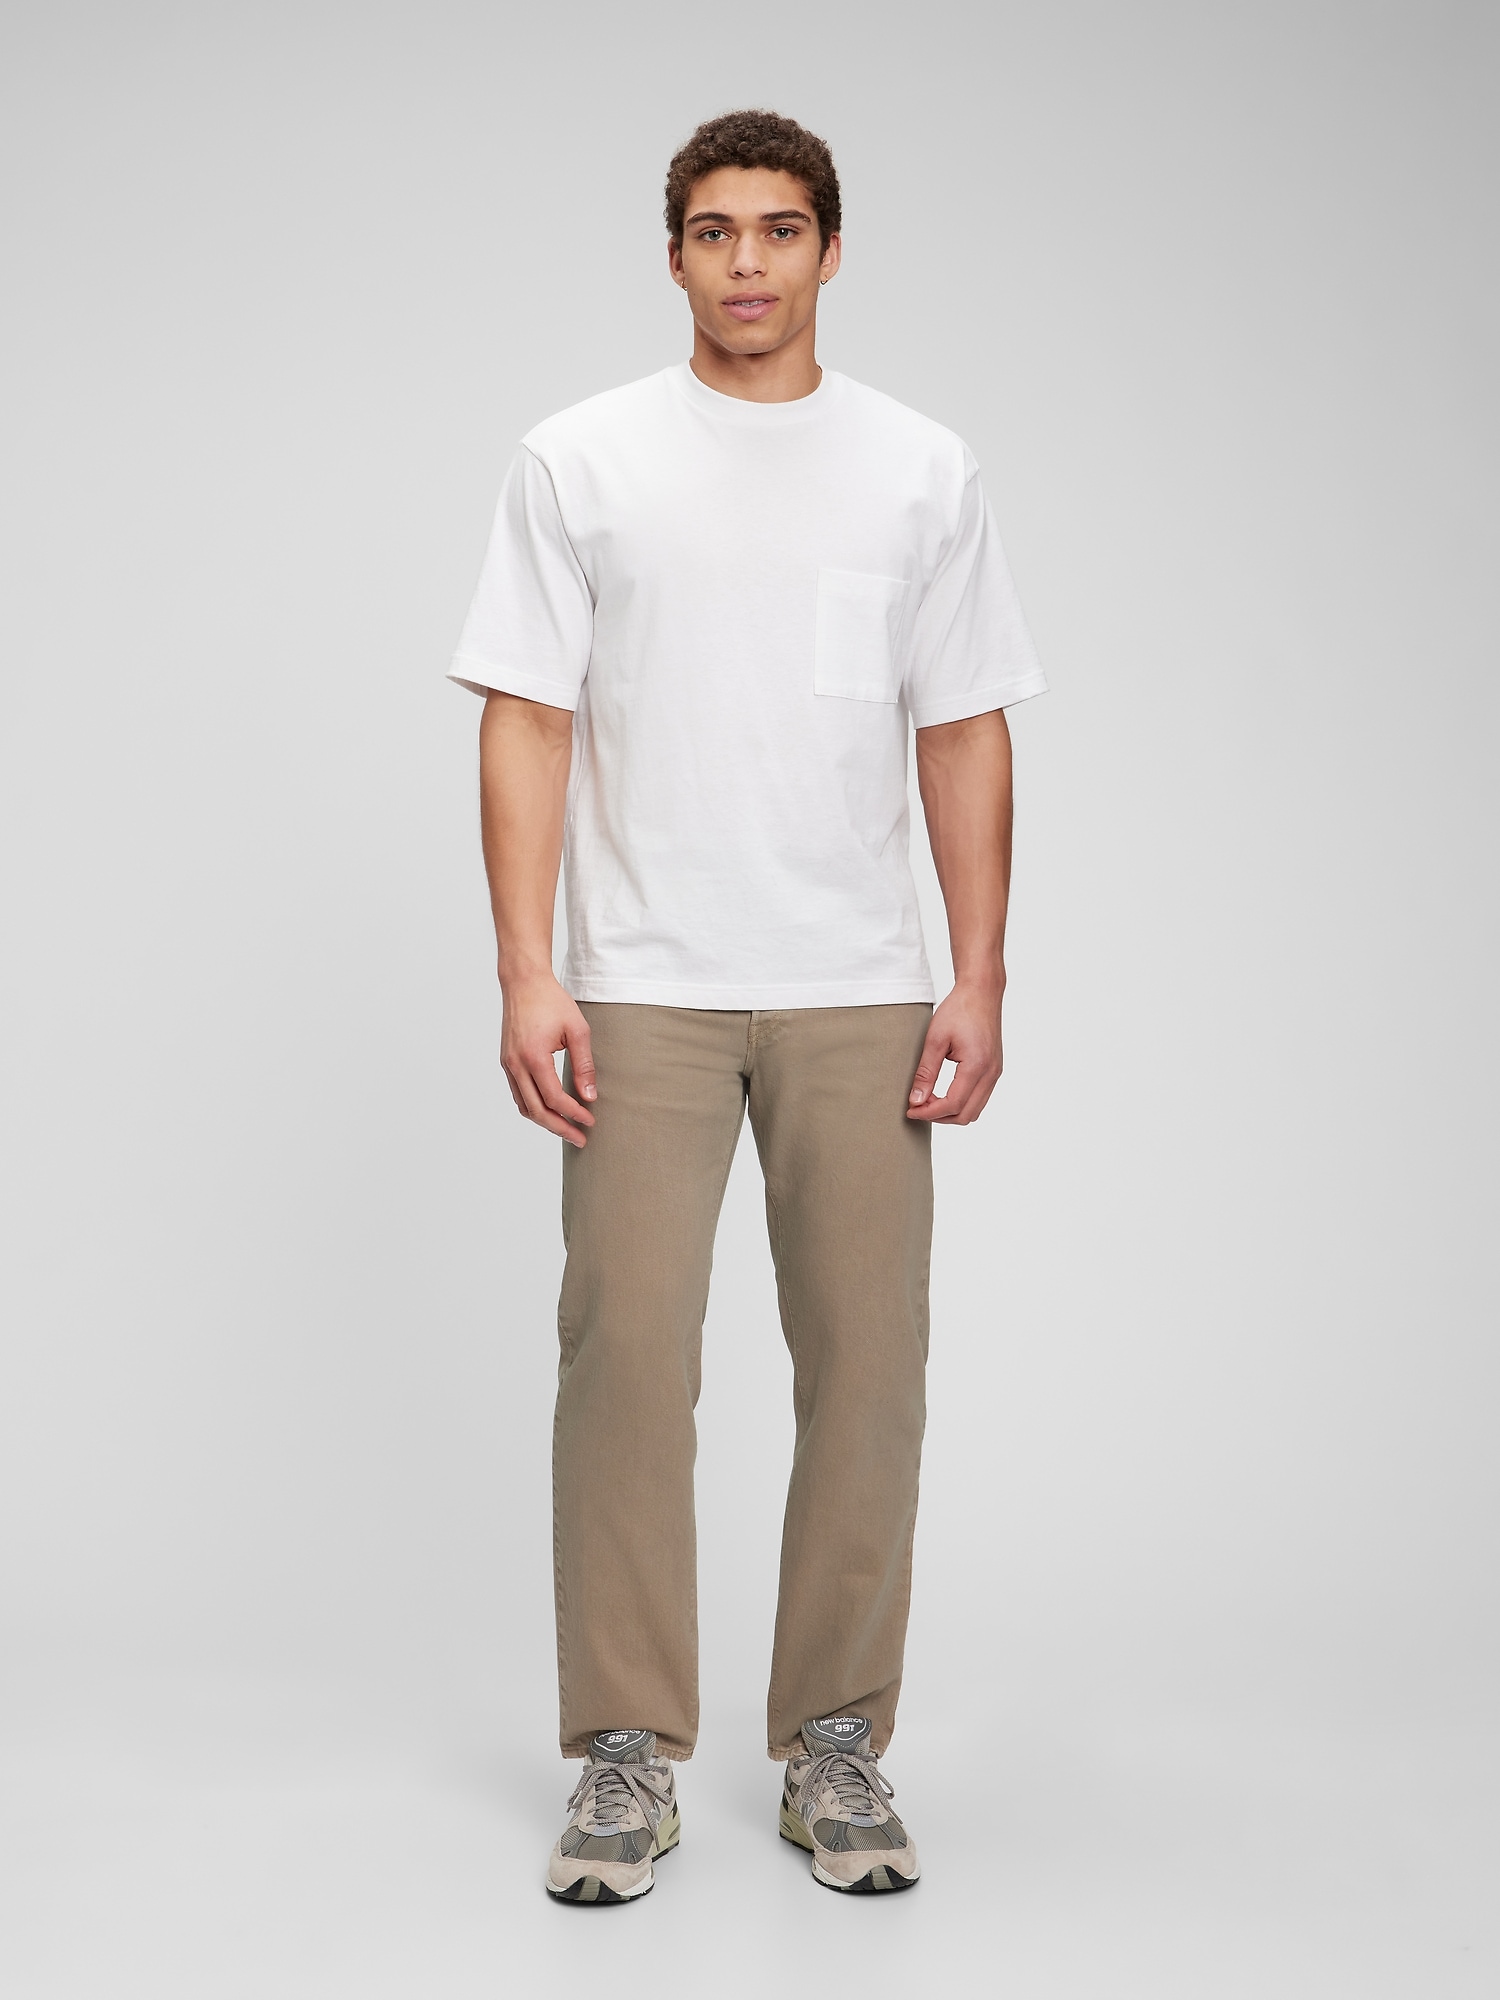 Gap Original Straight Fit Jeans with Washwell